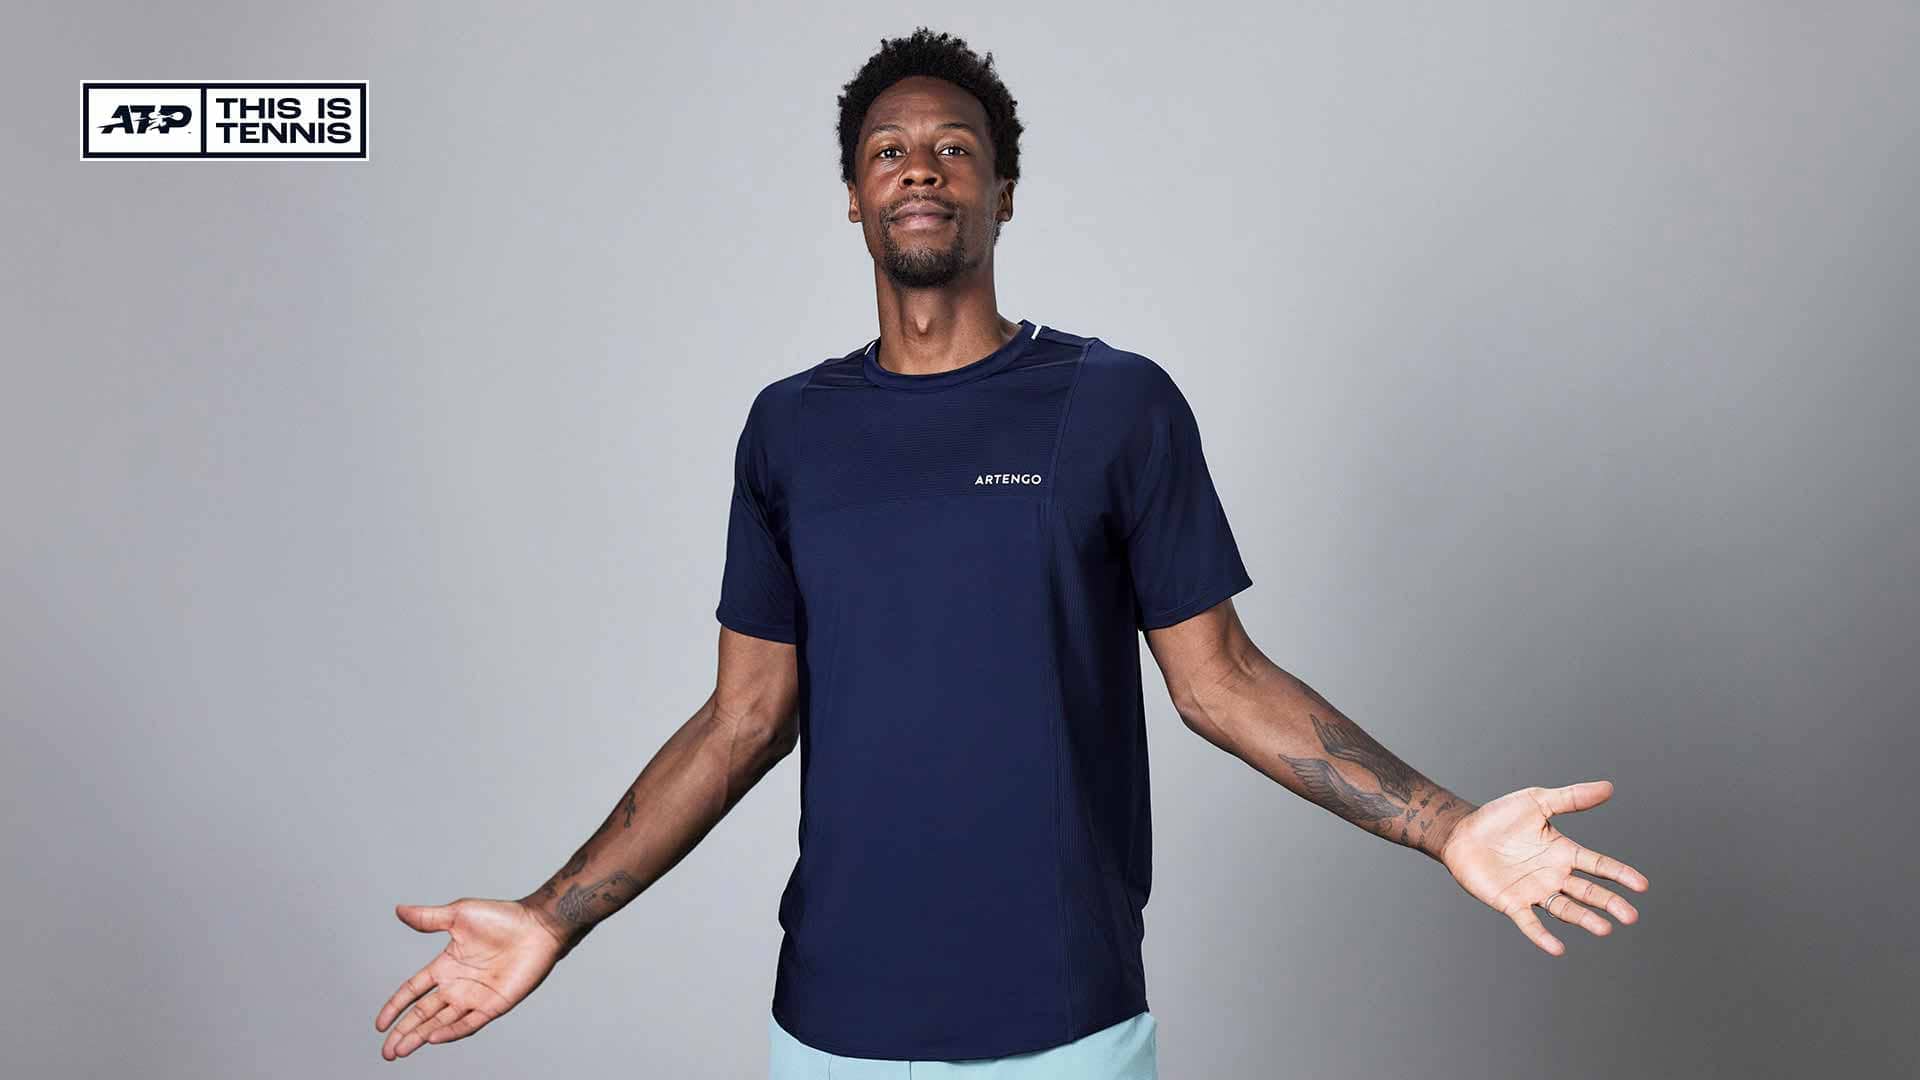 Gael Monfils has been attending magic shows since he was a teenager.